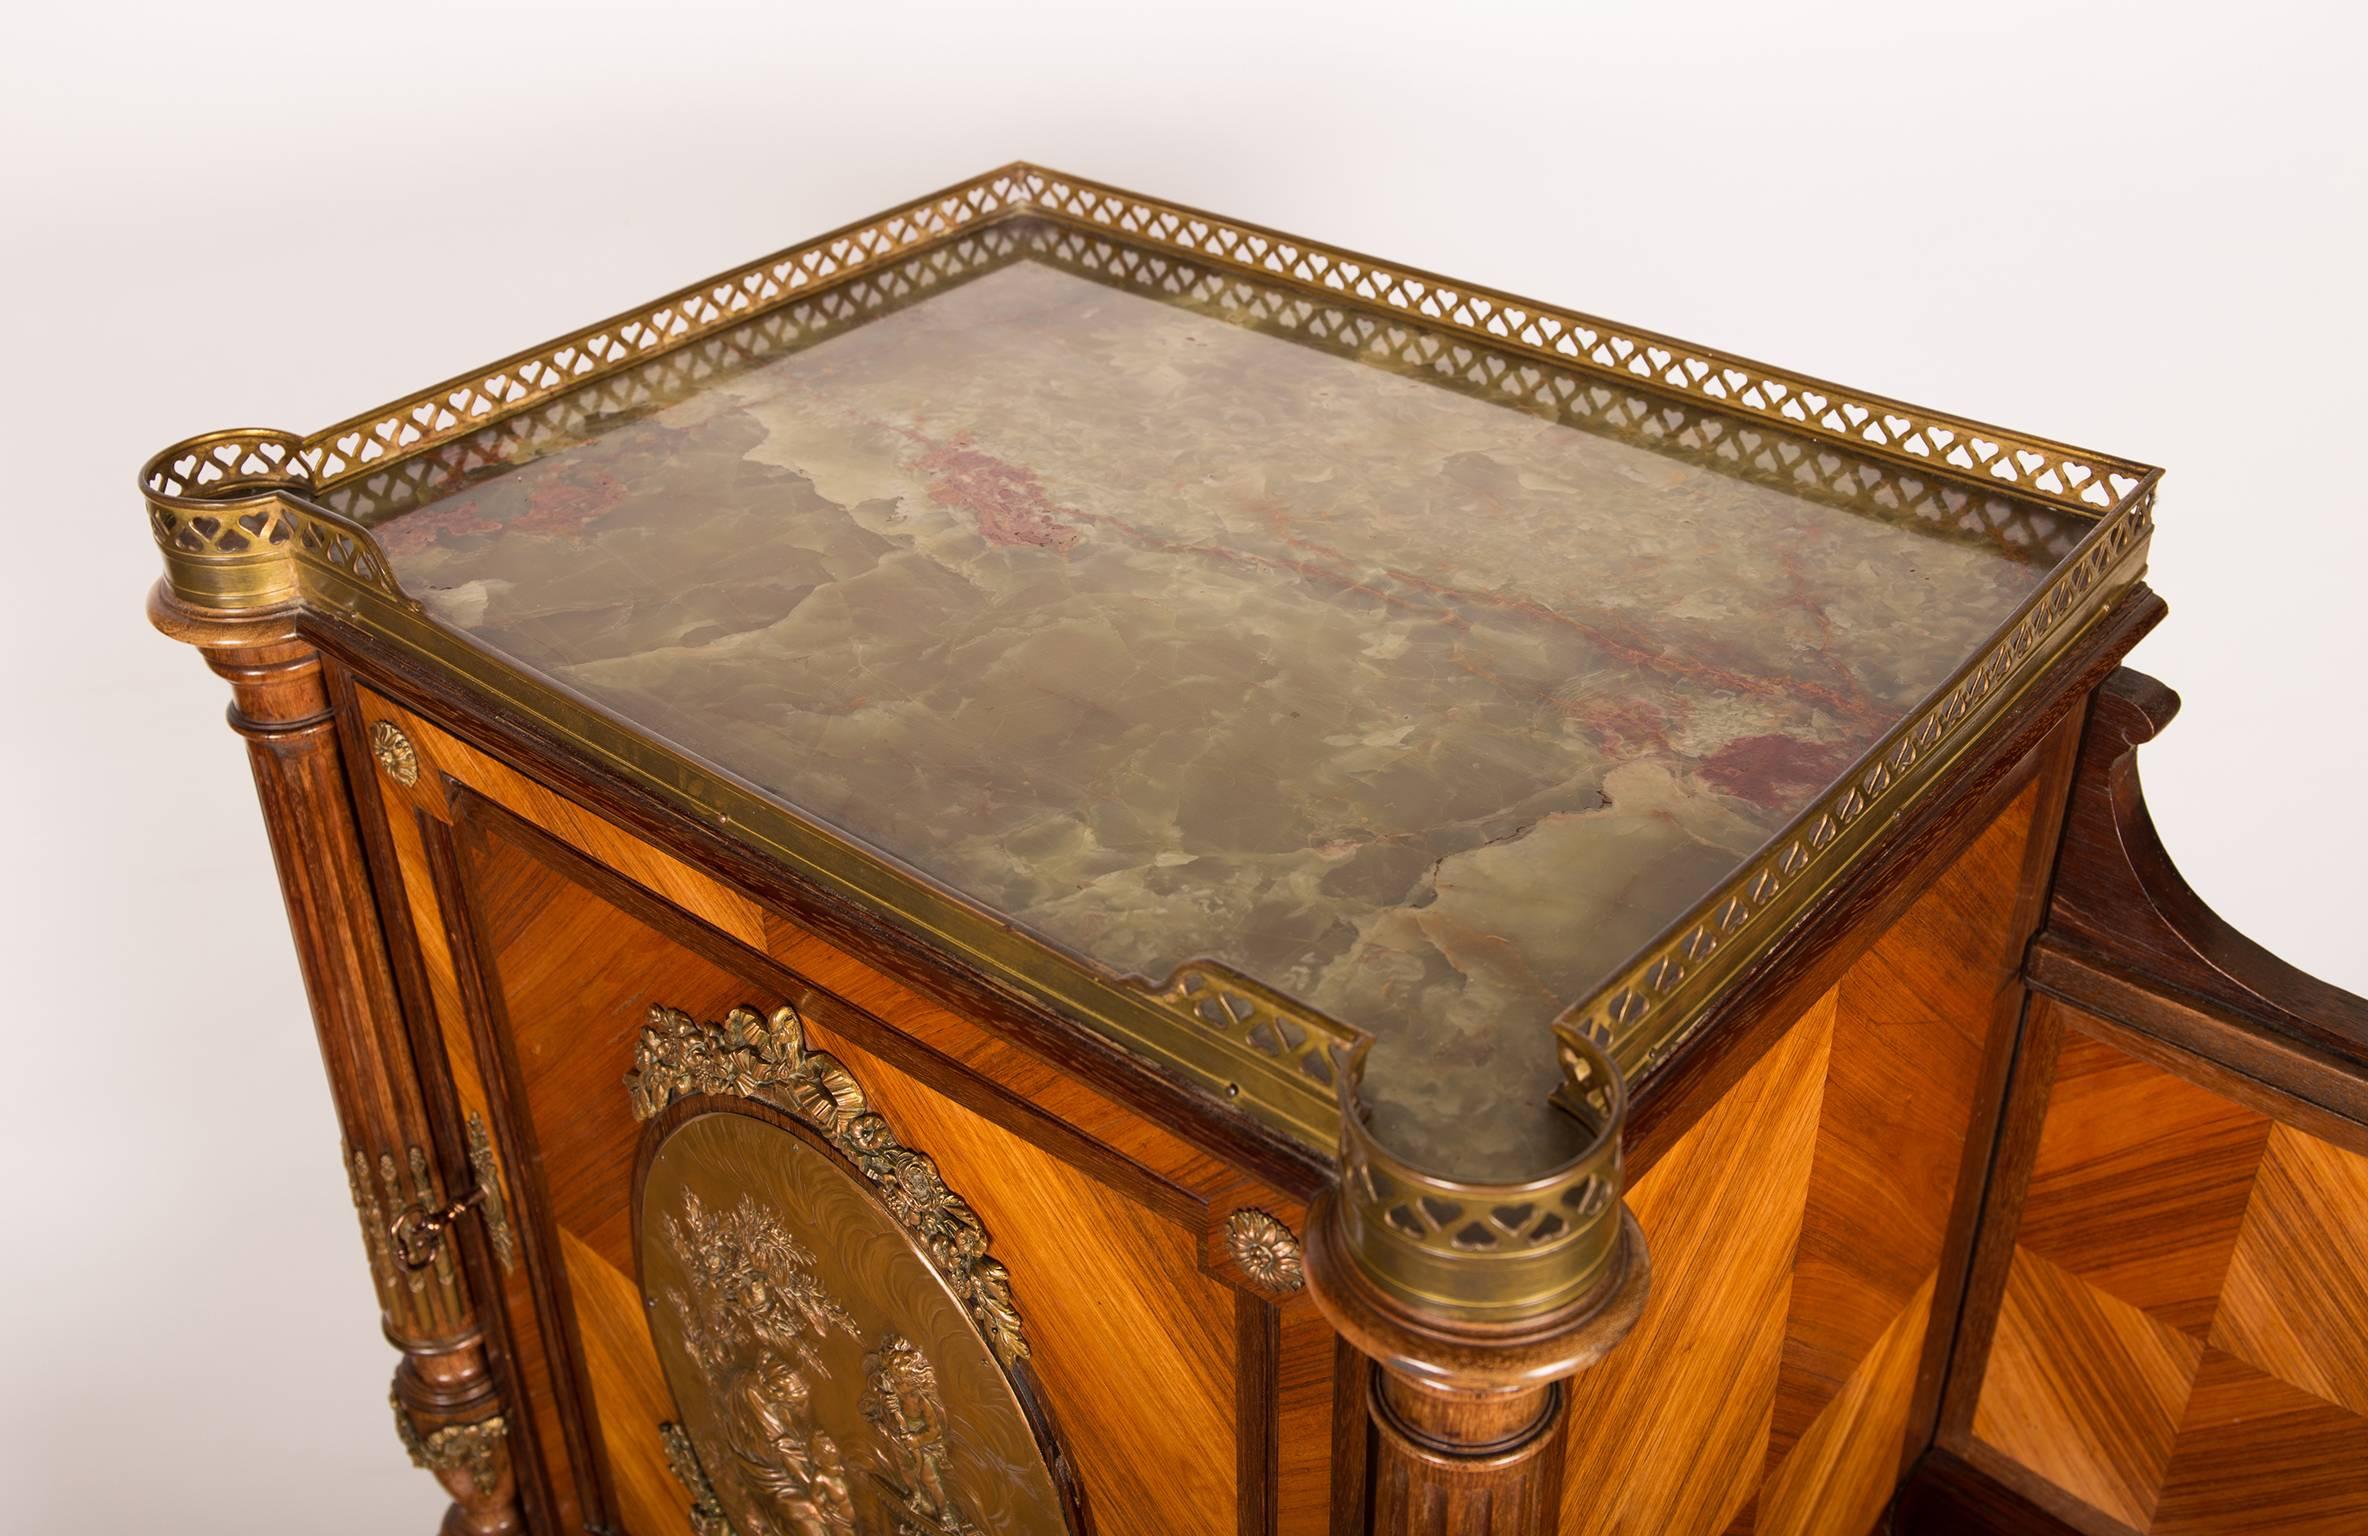  Louis XVI Style Cabinet, Kingwood, Tulipwood and Bronze, France 19th century For Sale 3